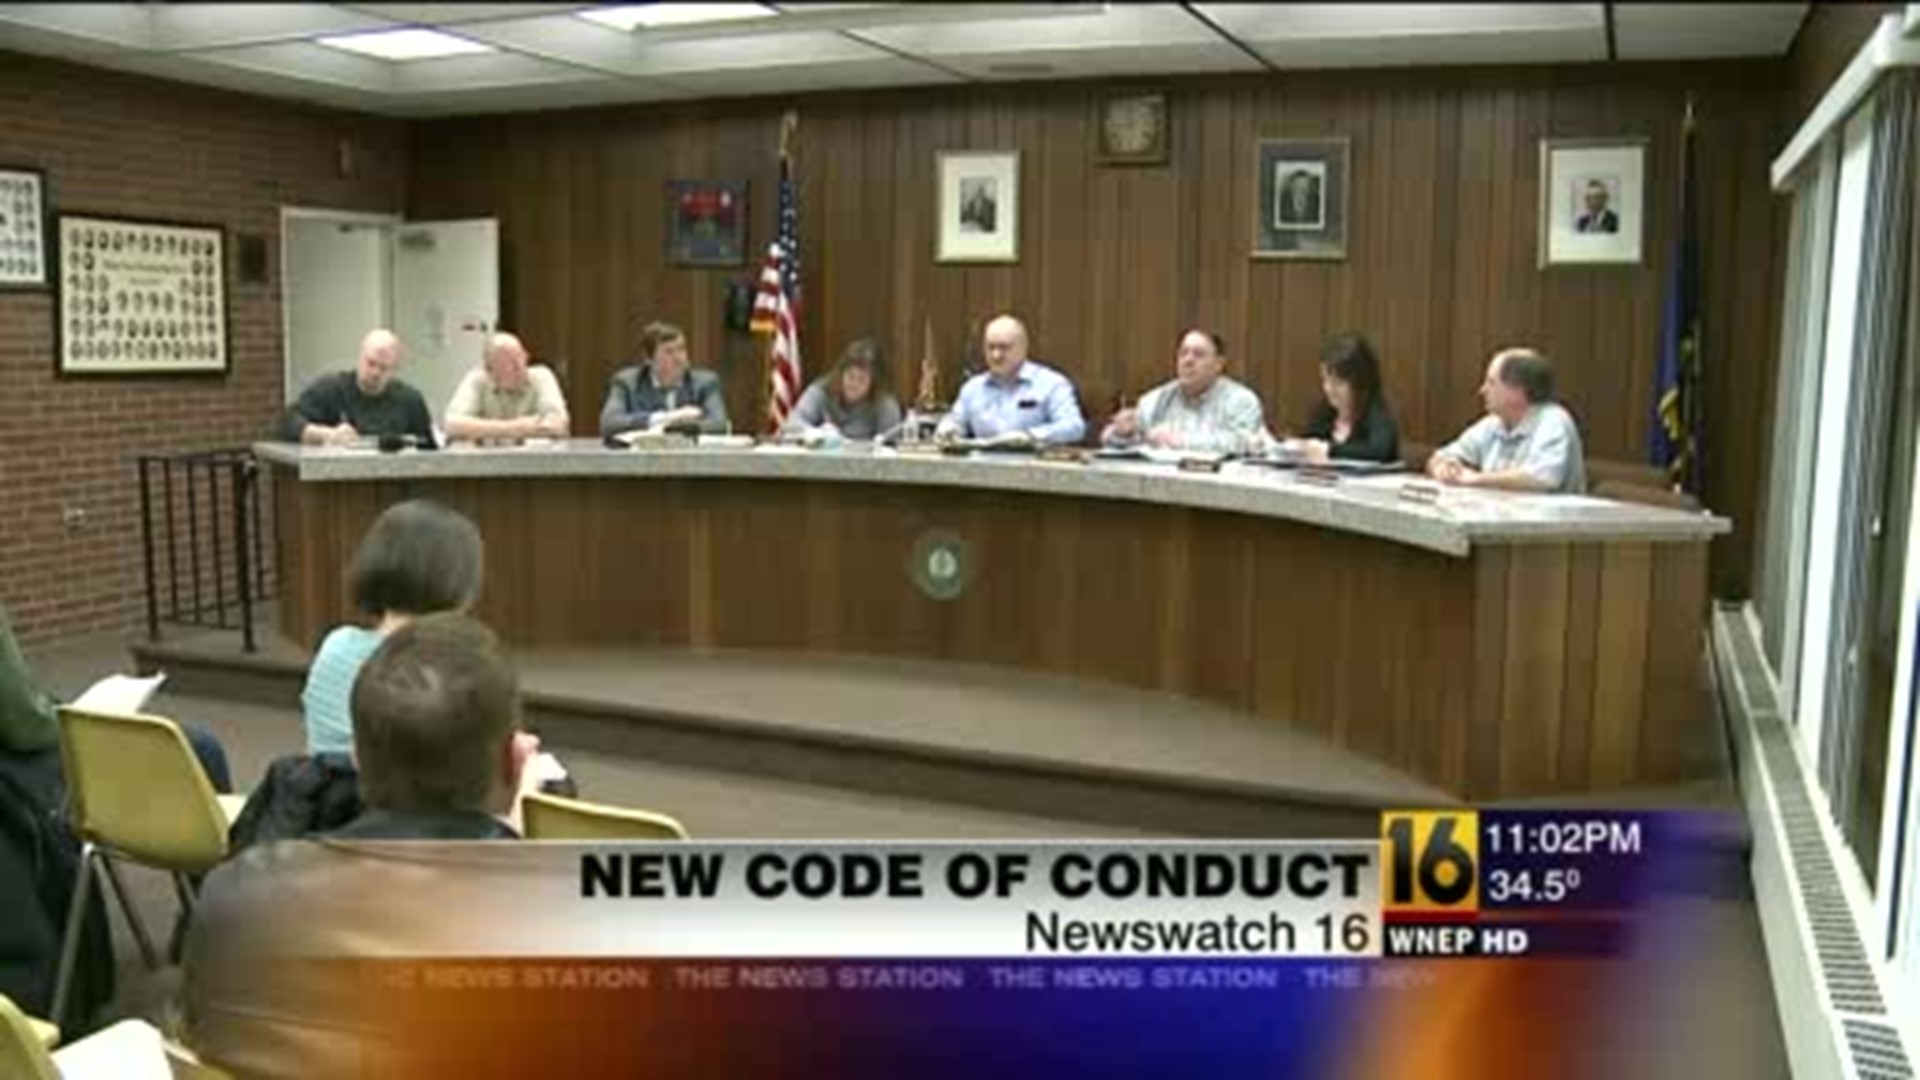 Council Adds Section on Conduct